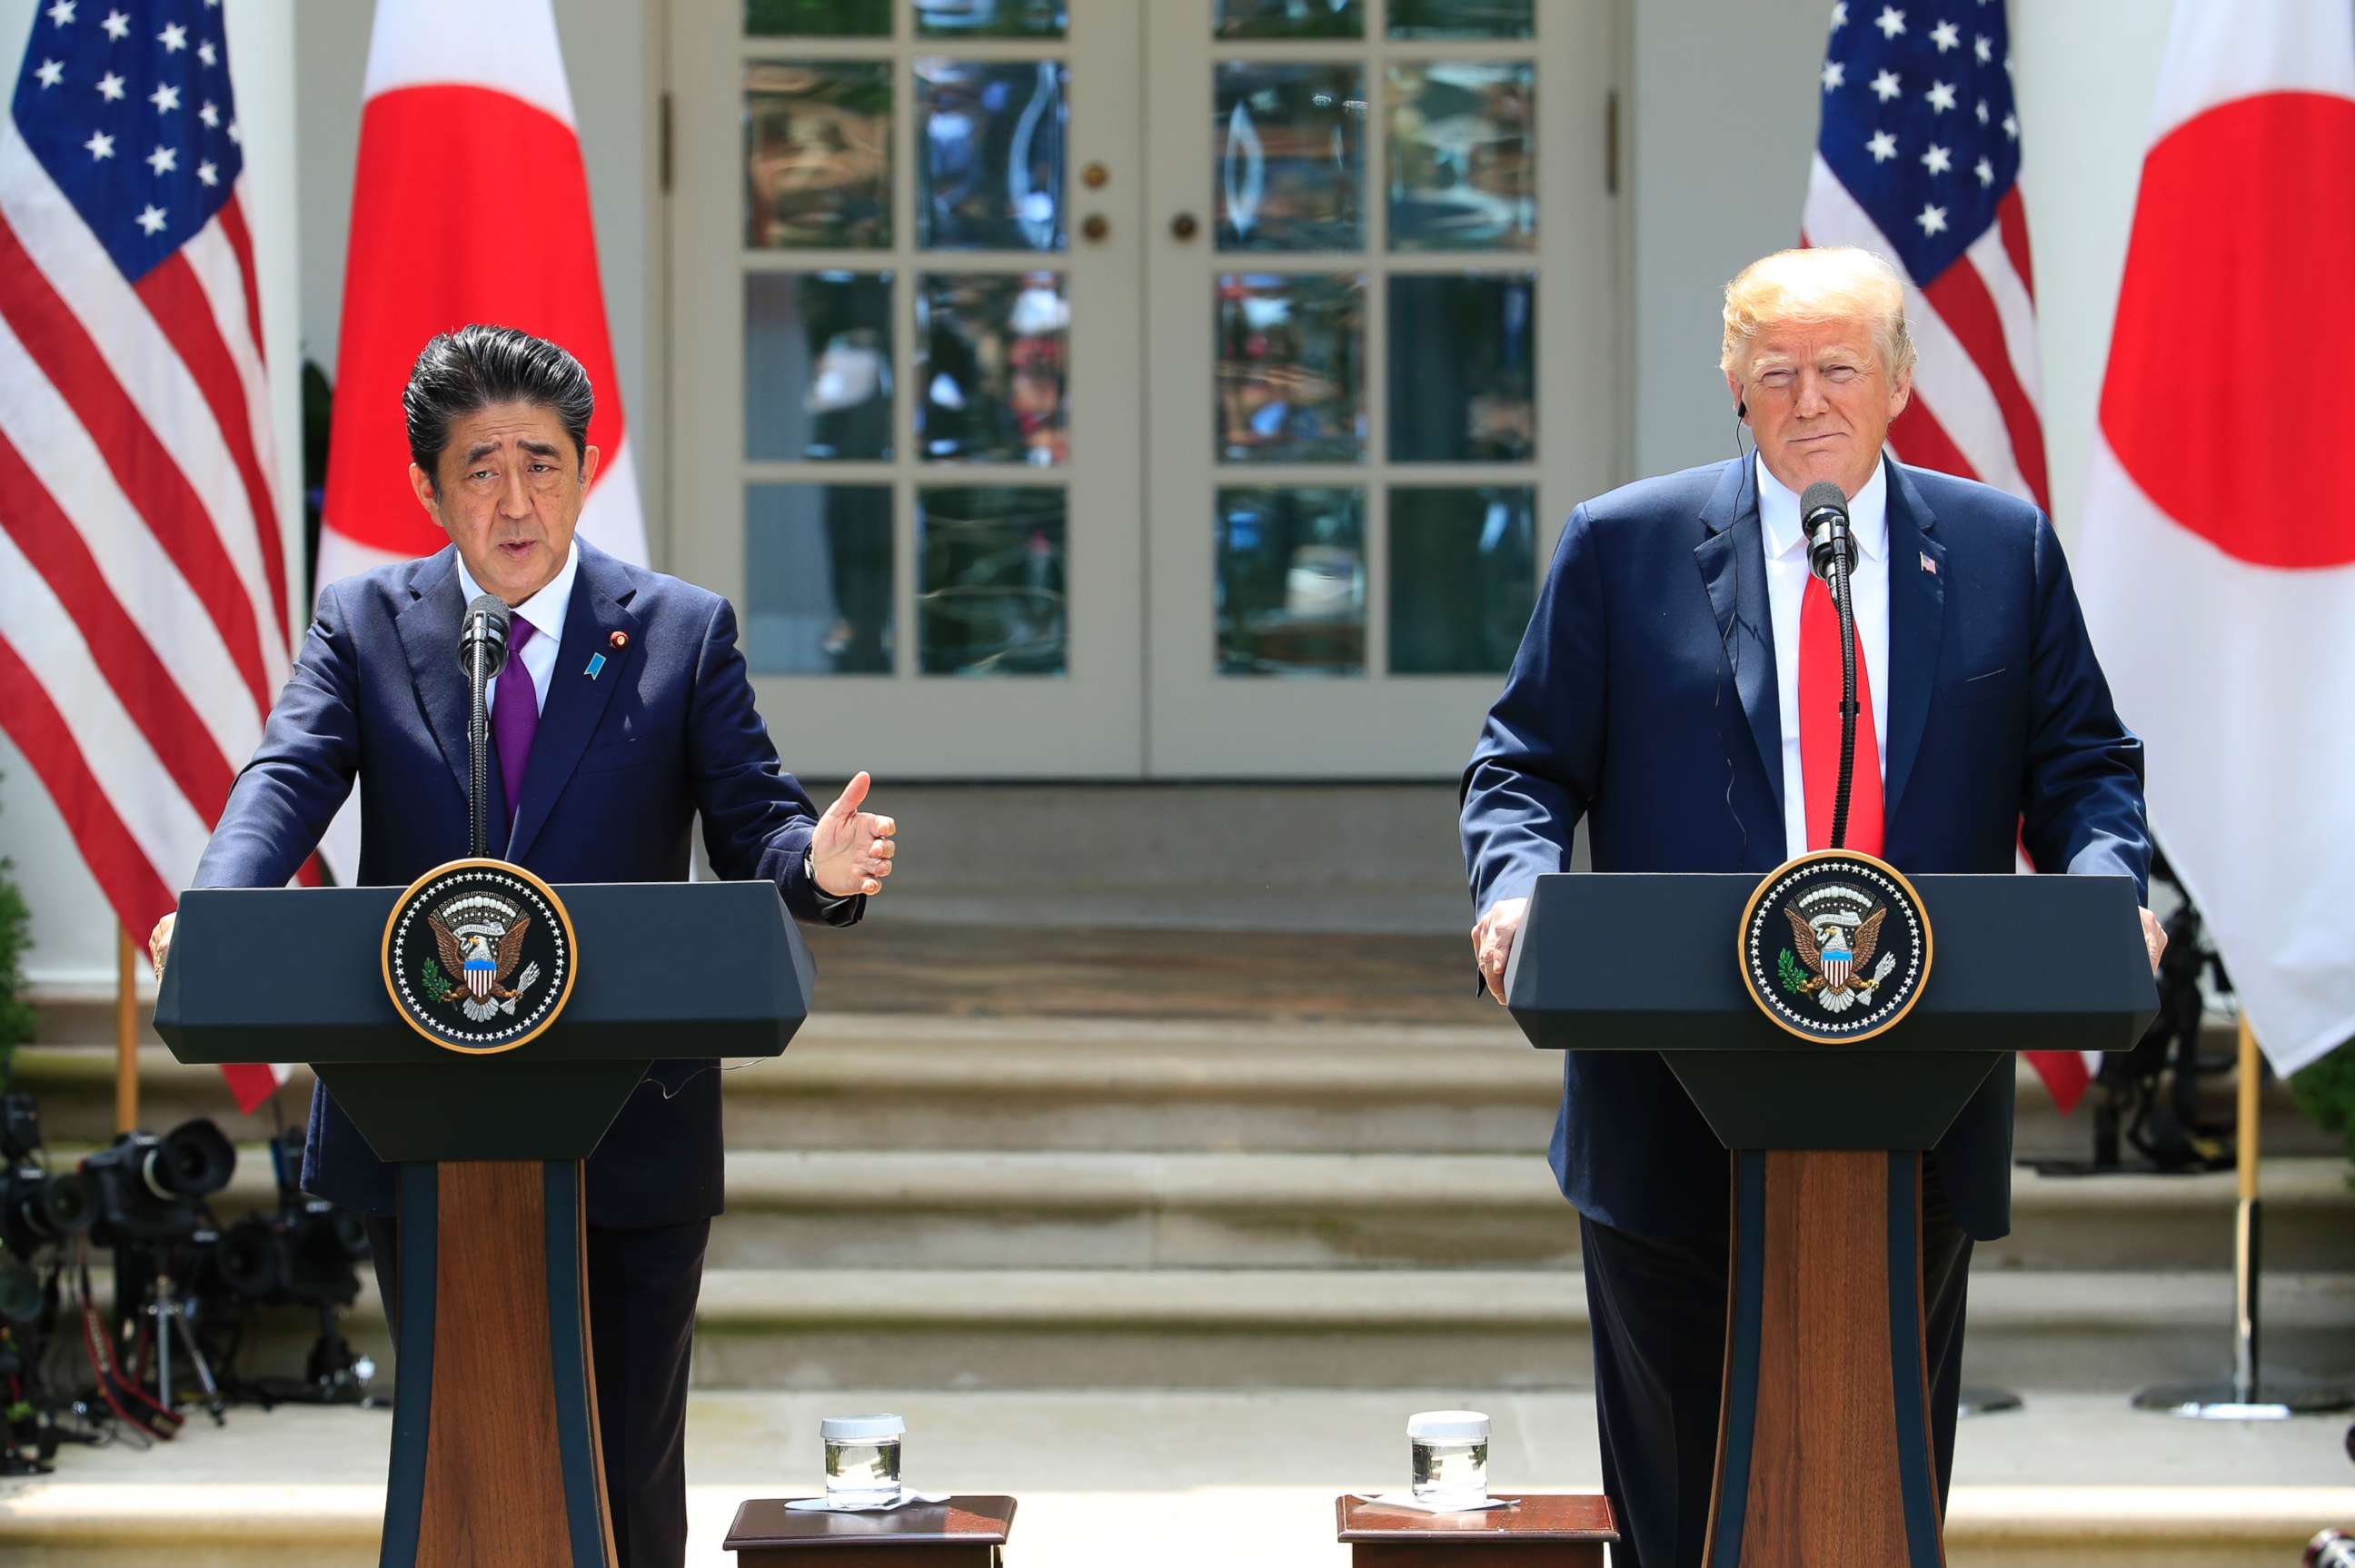 PHOTO: Japanese Prime Minister Shinzo Abe with President Donald Trump speaks during a news conference in the Rose Garden at the White House in Washington, June 7, 2018.